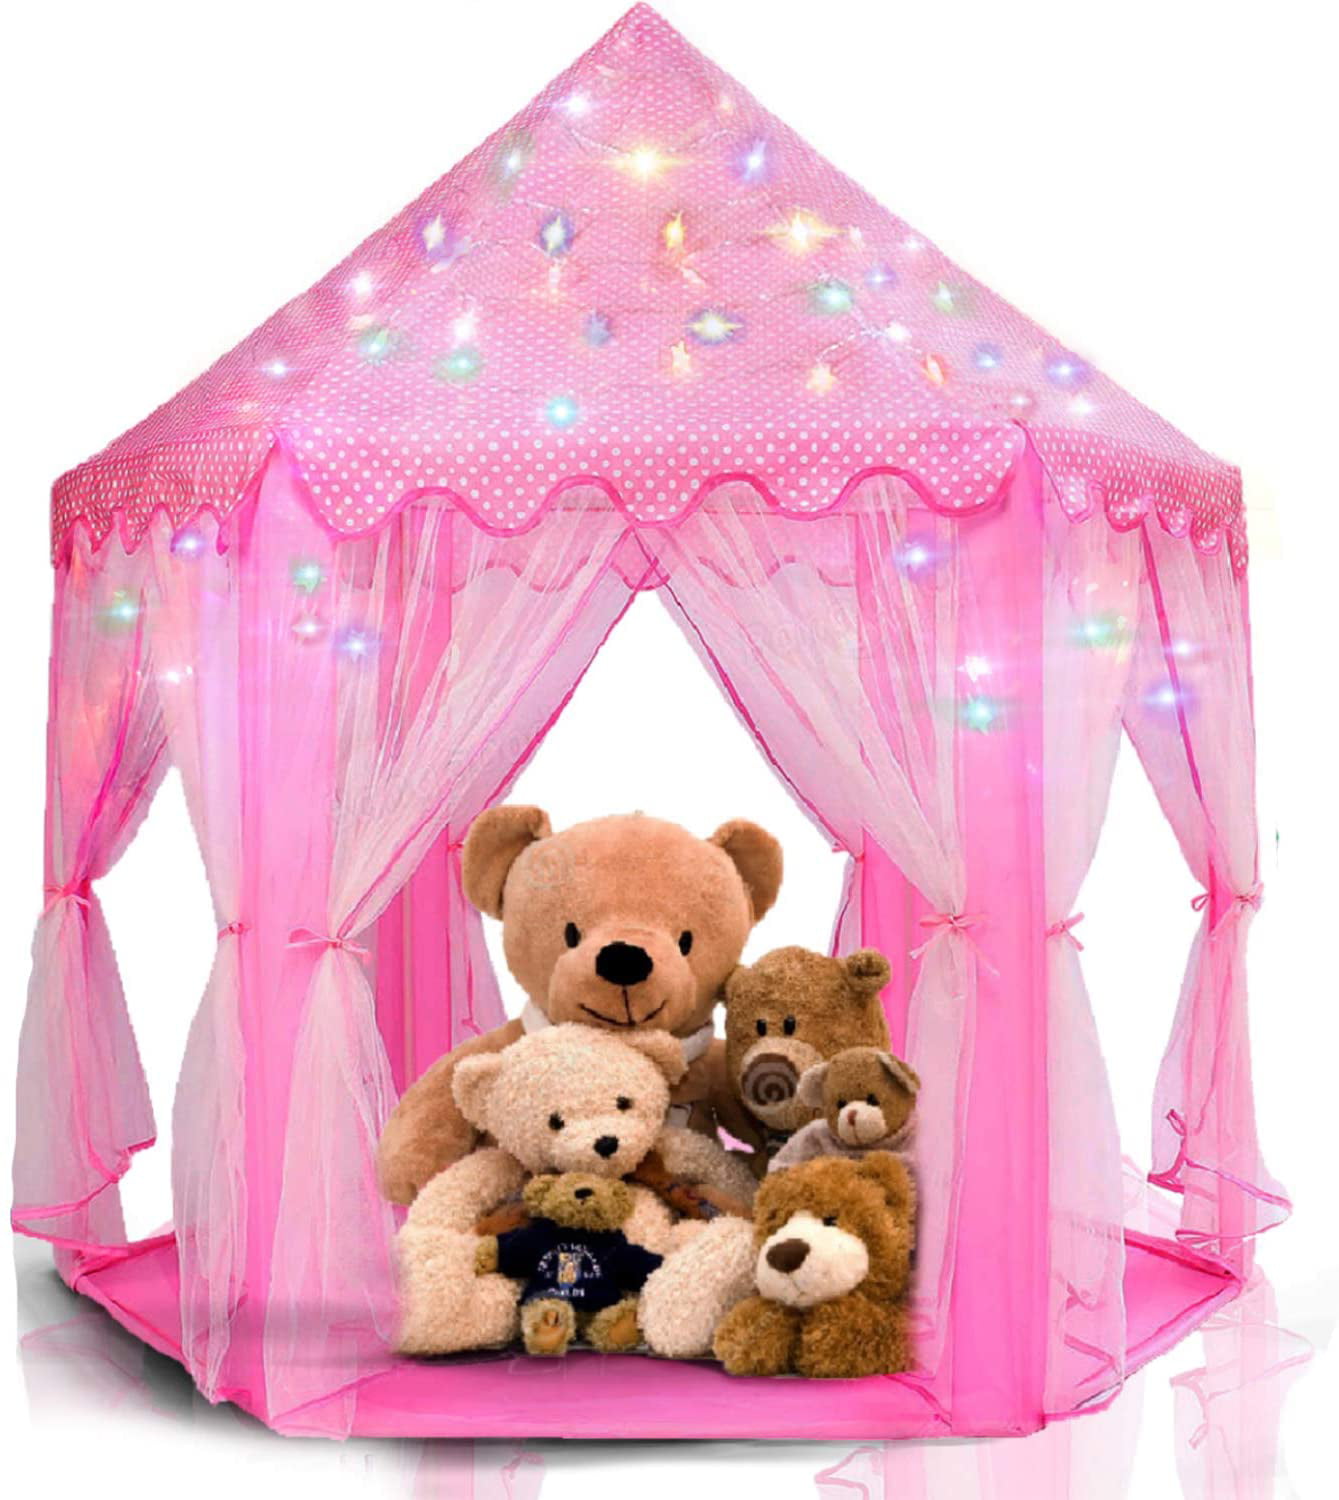 LED START Light in USA Outdoor and Indoor Princess Castle Tent Pink Huge Size 